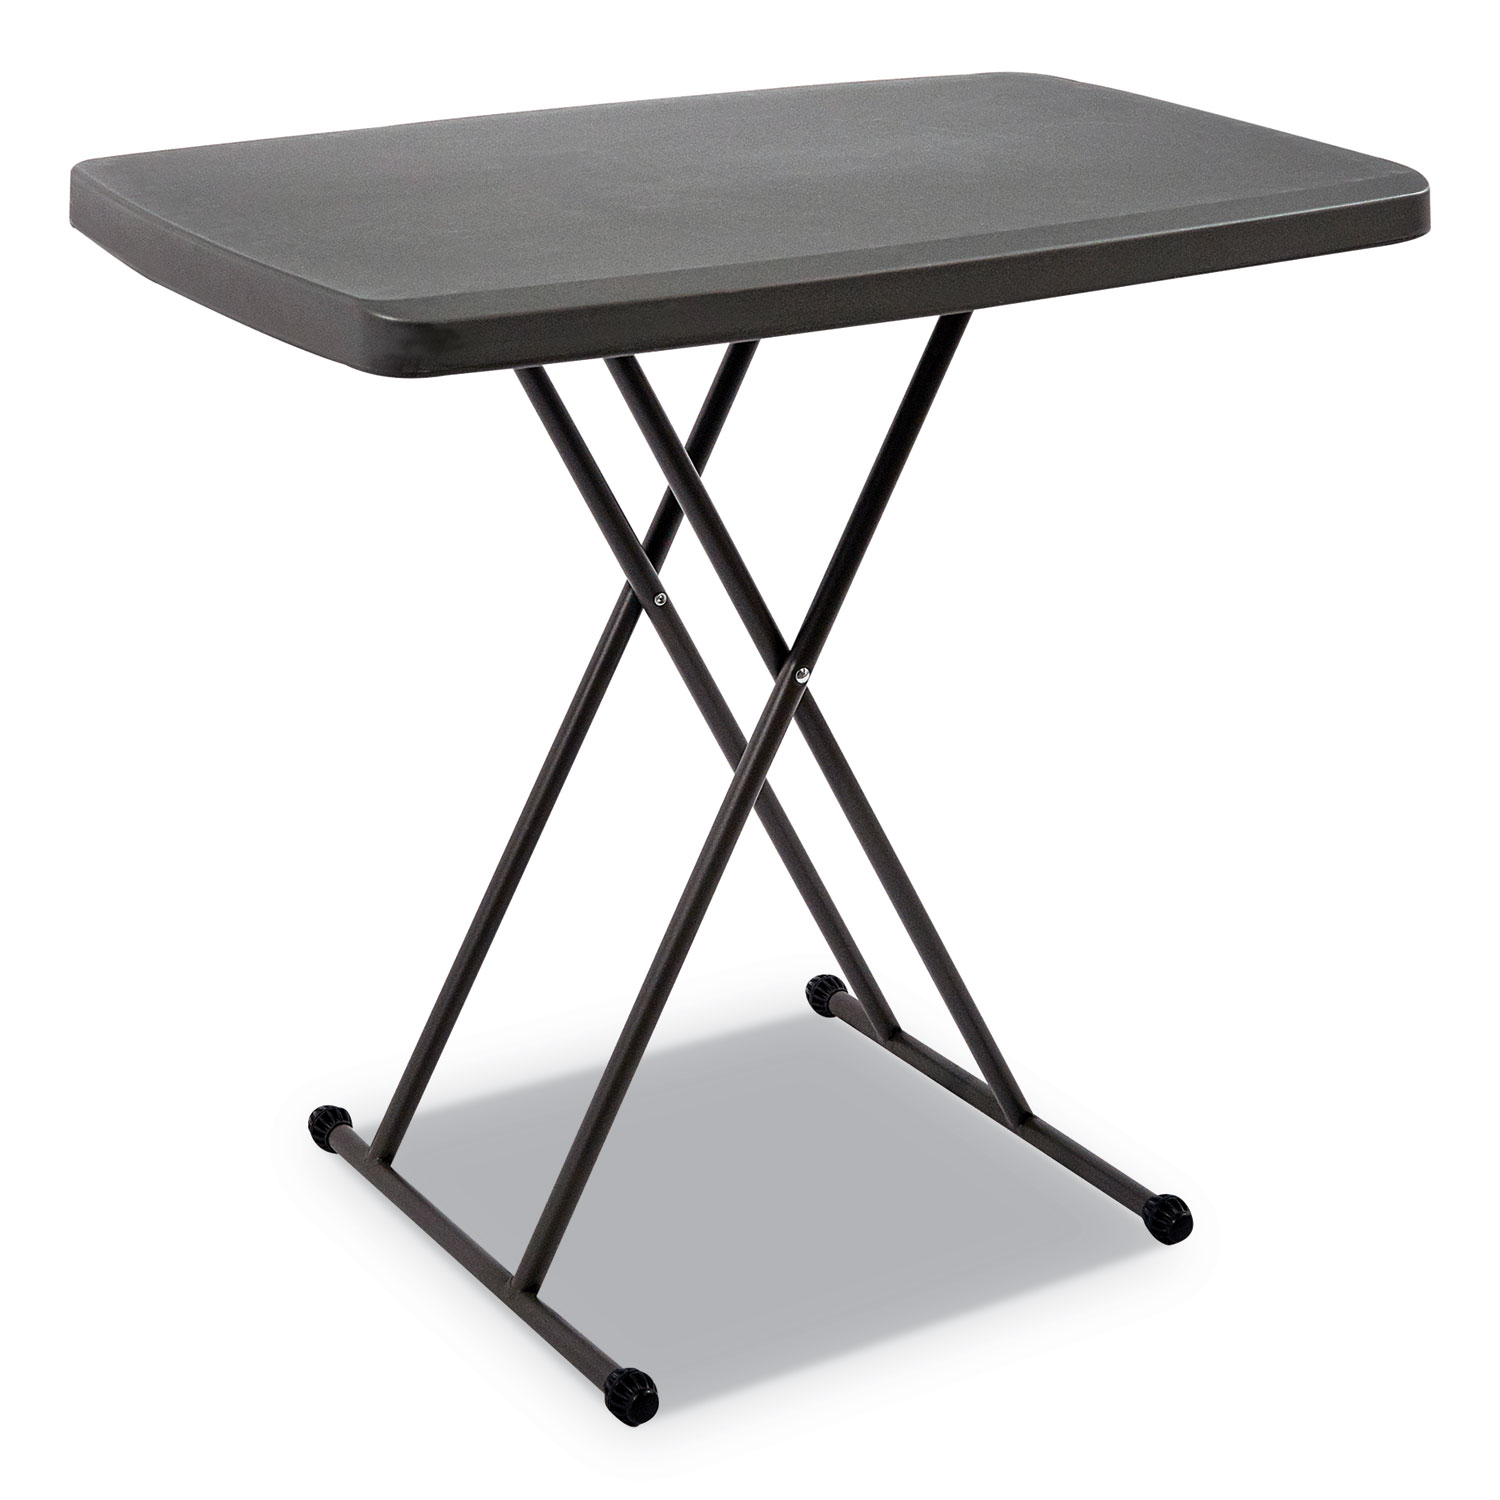  Iceberg 65491 IndestrucTables Too 1200 Series Resin Personal Folding Table, 30 x 20, Charcoal (ICE65491) 